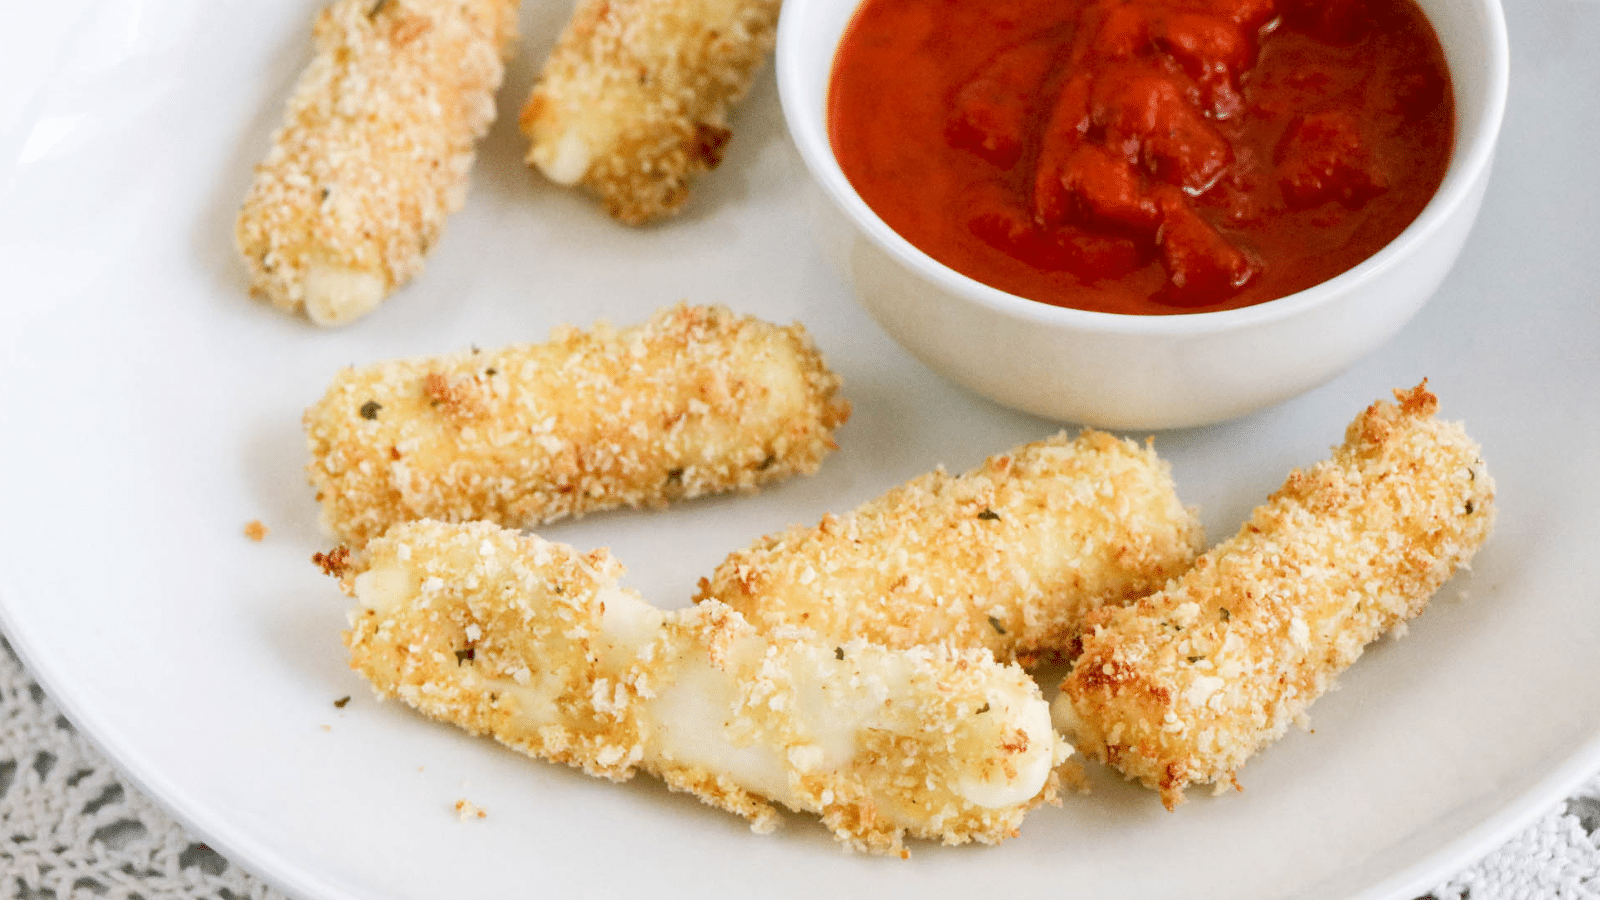 air fryer mozzarella sticks on a white plate with one stretched out showing the cheese inside and marinara sauce